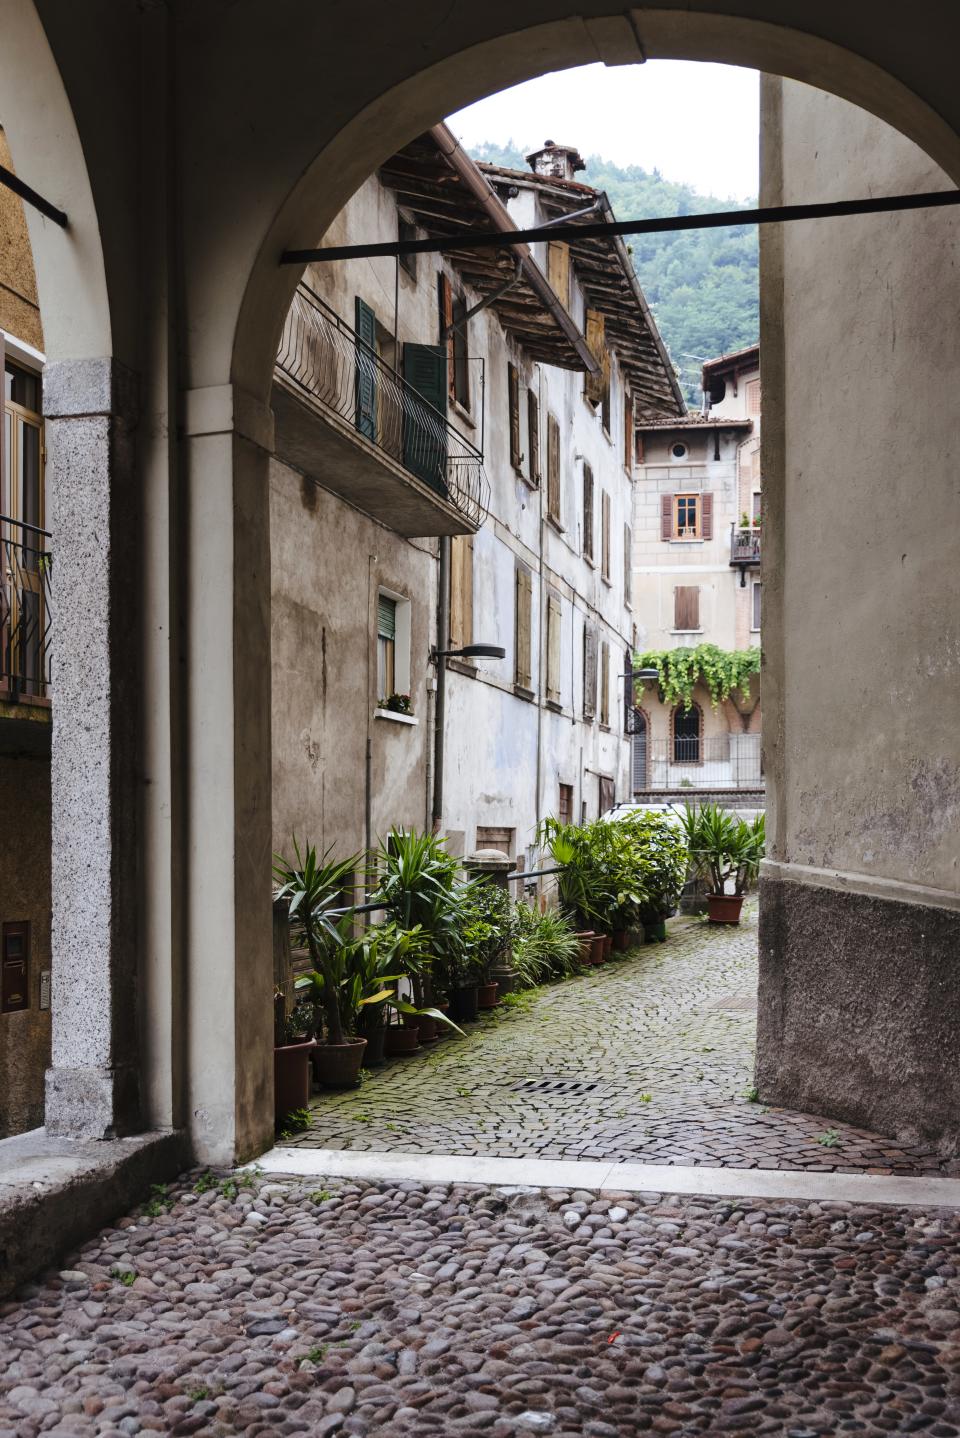 Lavenone is another historic town that's received a boost from the project thanks to Milanese design firm Eligo Studio.